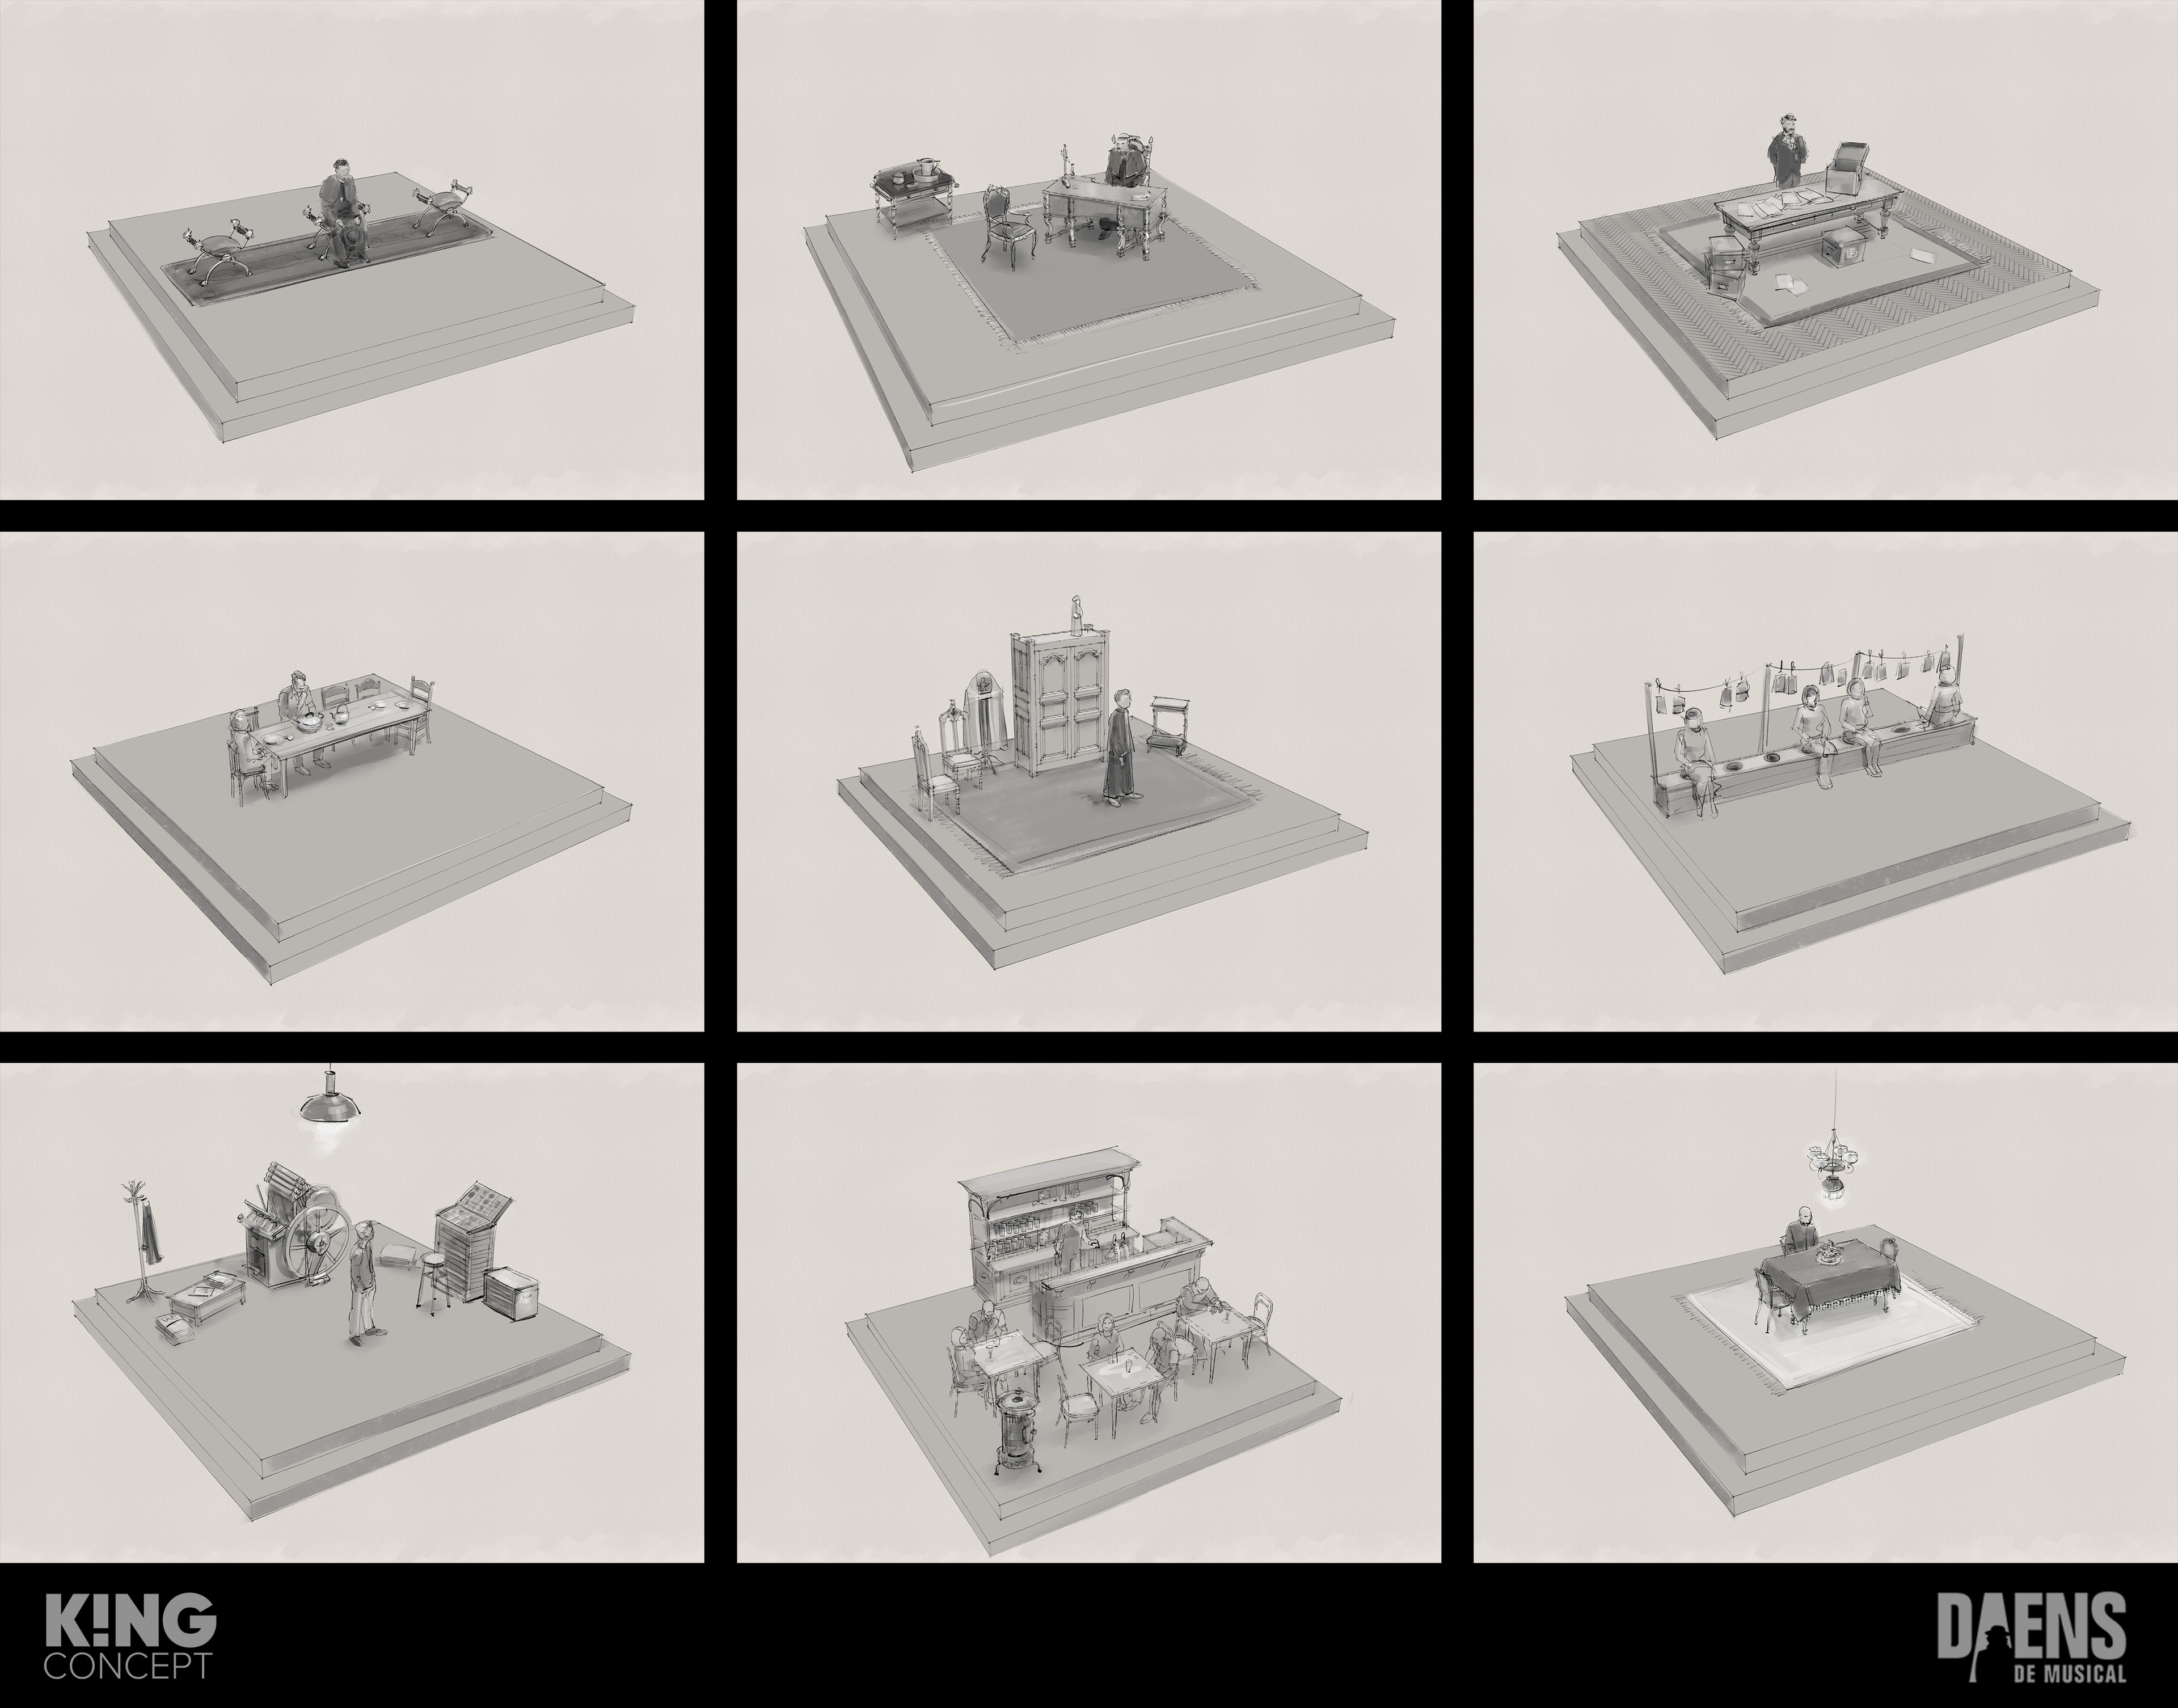 A couple of set designs for the moving platforms.